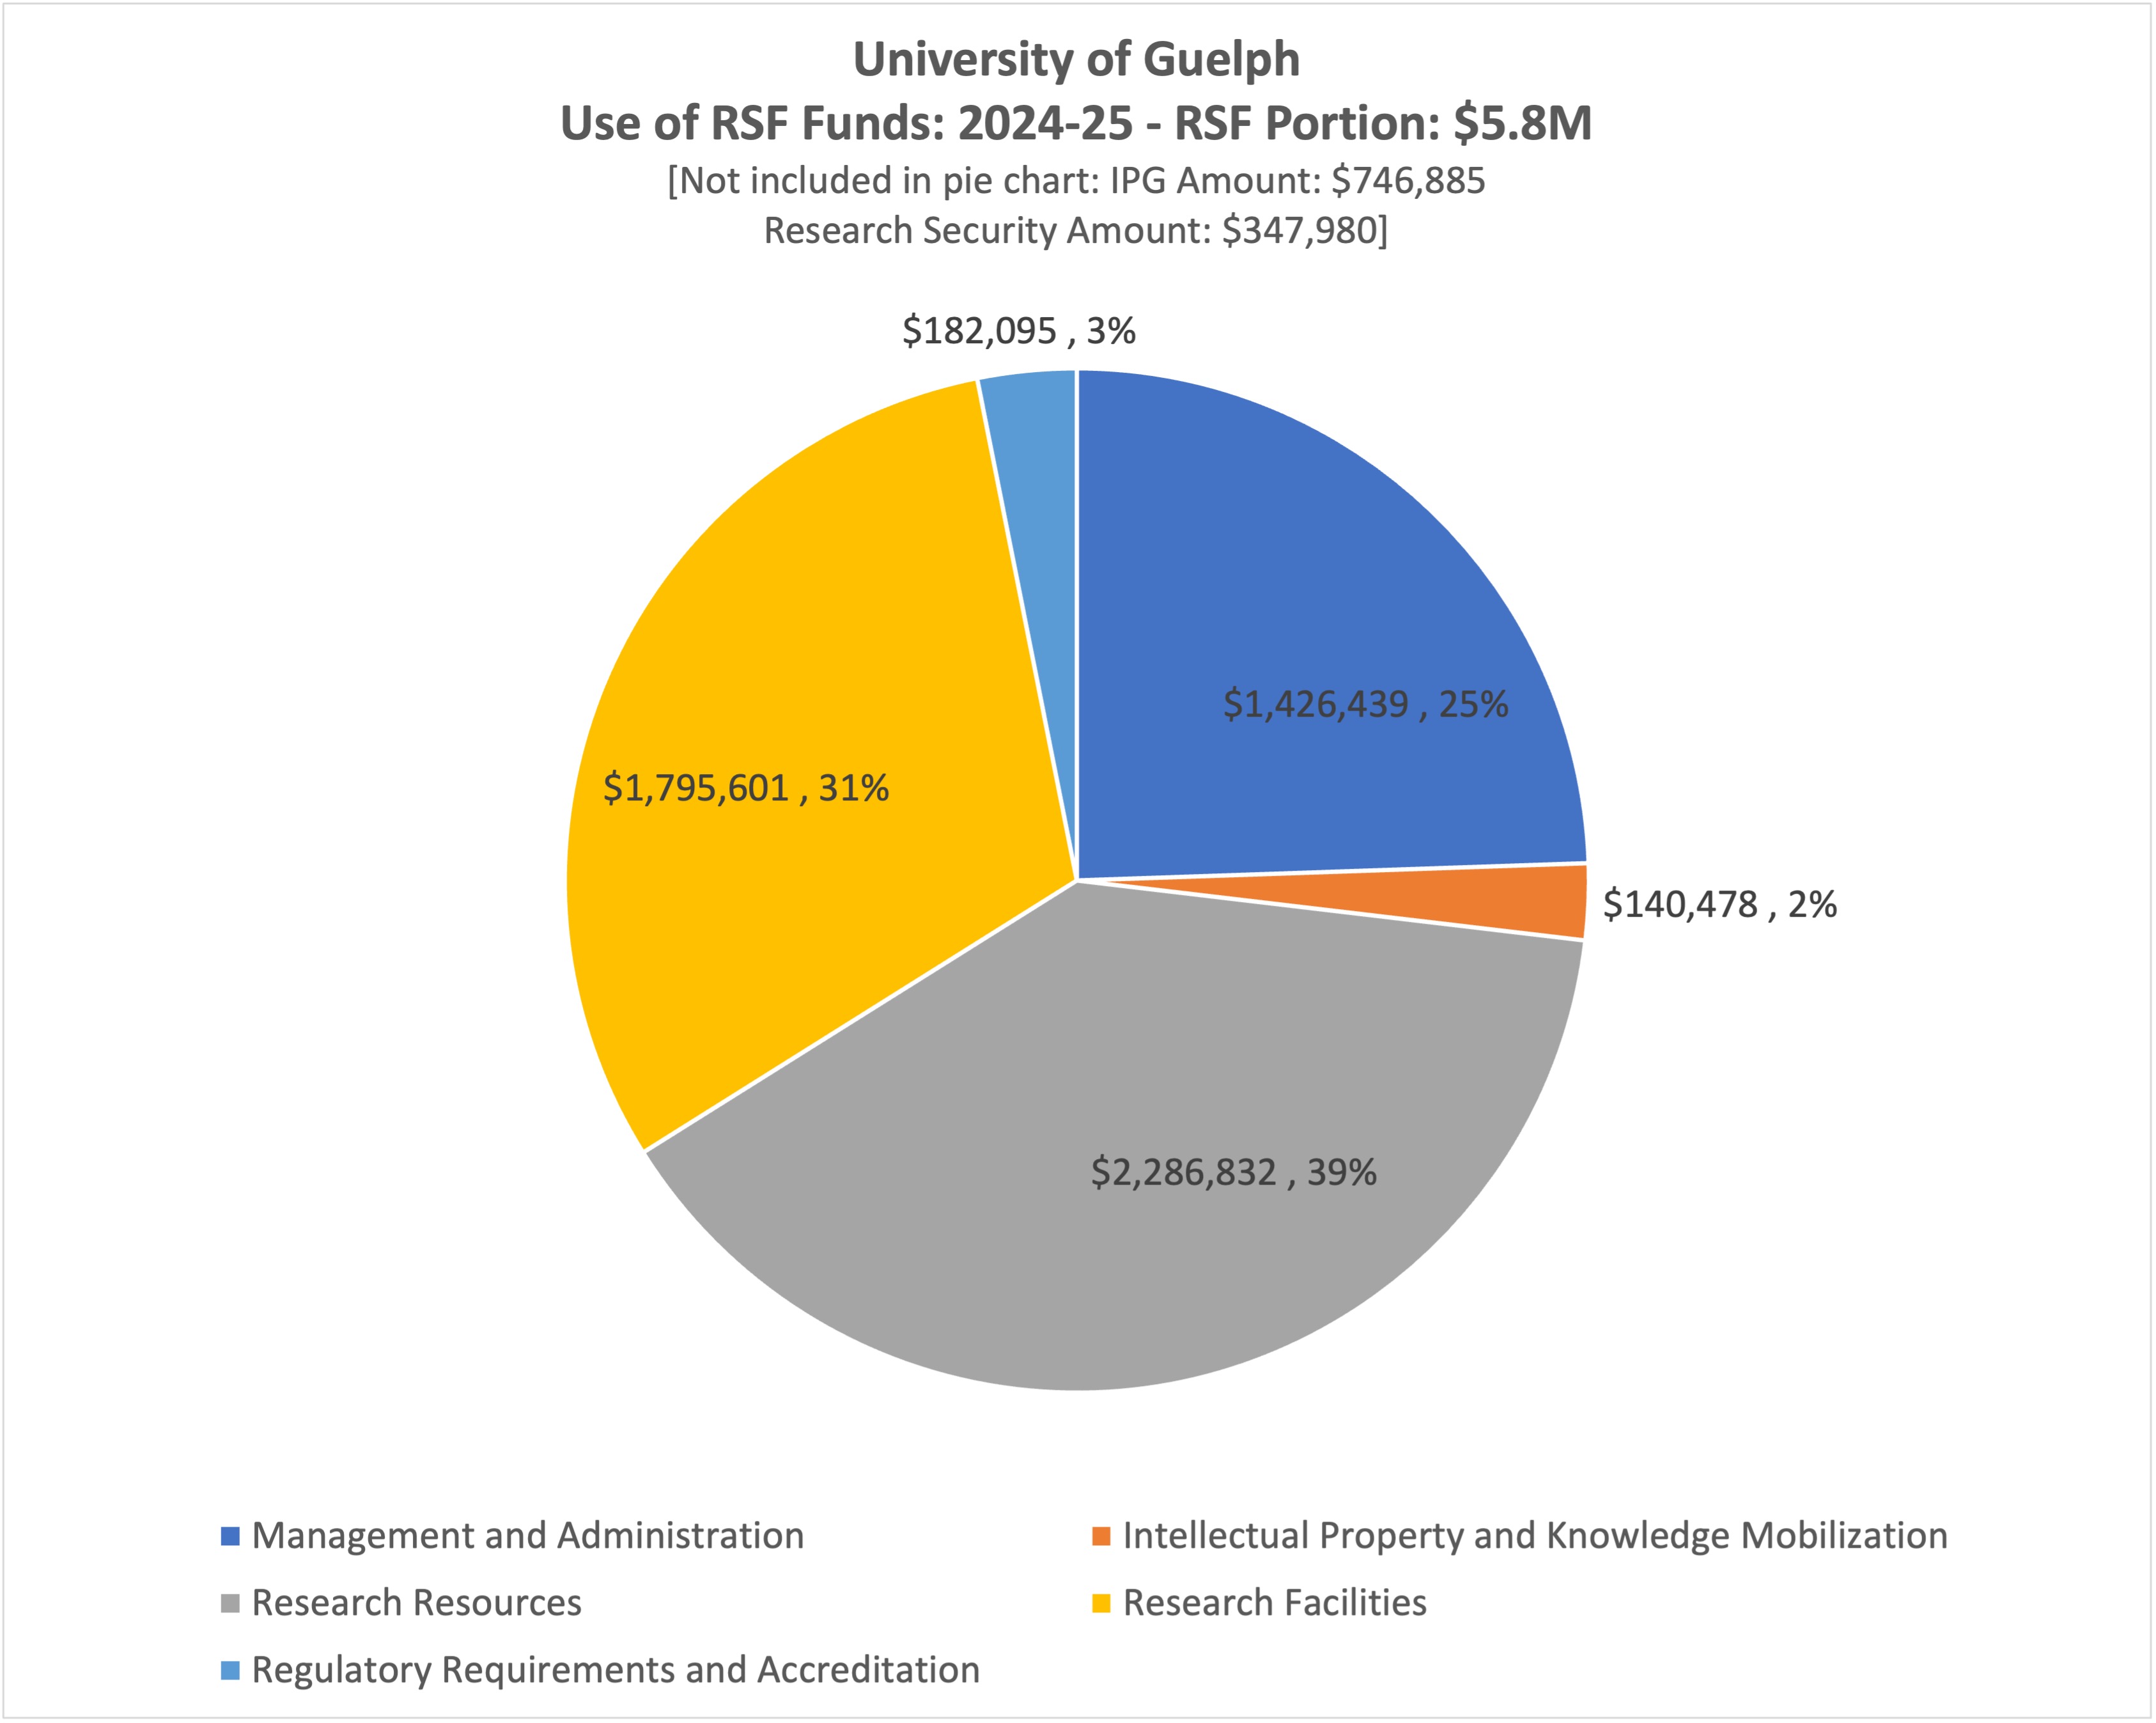 University of Guelph - Use of RSF and IPG Funds: 2024-25 - RSF Portion: $5.8M [Not included in pie chart: IPG Amount $746,885, Research Security Amount: $347,980]. Management and Administration - $1,426,439, 25%. Intellectual Property and Knowledge Mobilization - $140,478, 2%. Research Resources $2,286,832, 39%. Research Facilities - $1,795,605, 31%. Regulatory Requirements and Accreditation - $182,095, 3%.